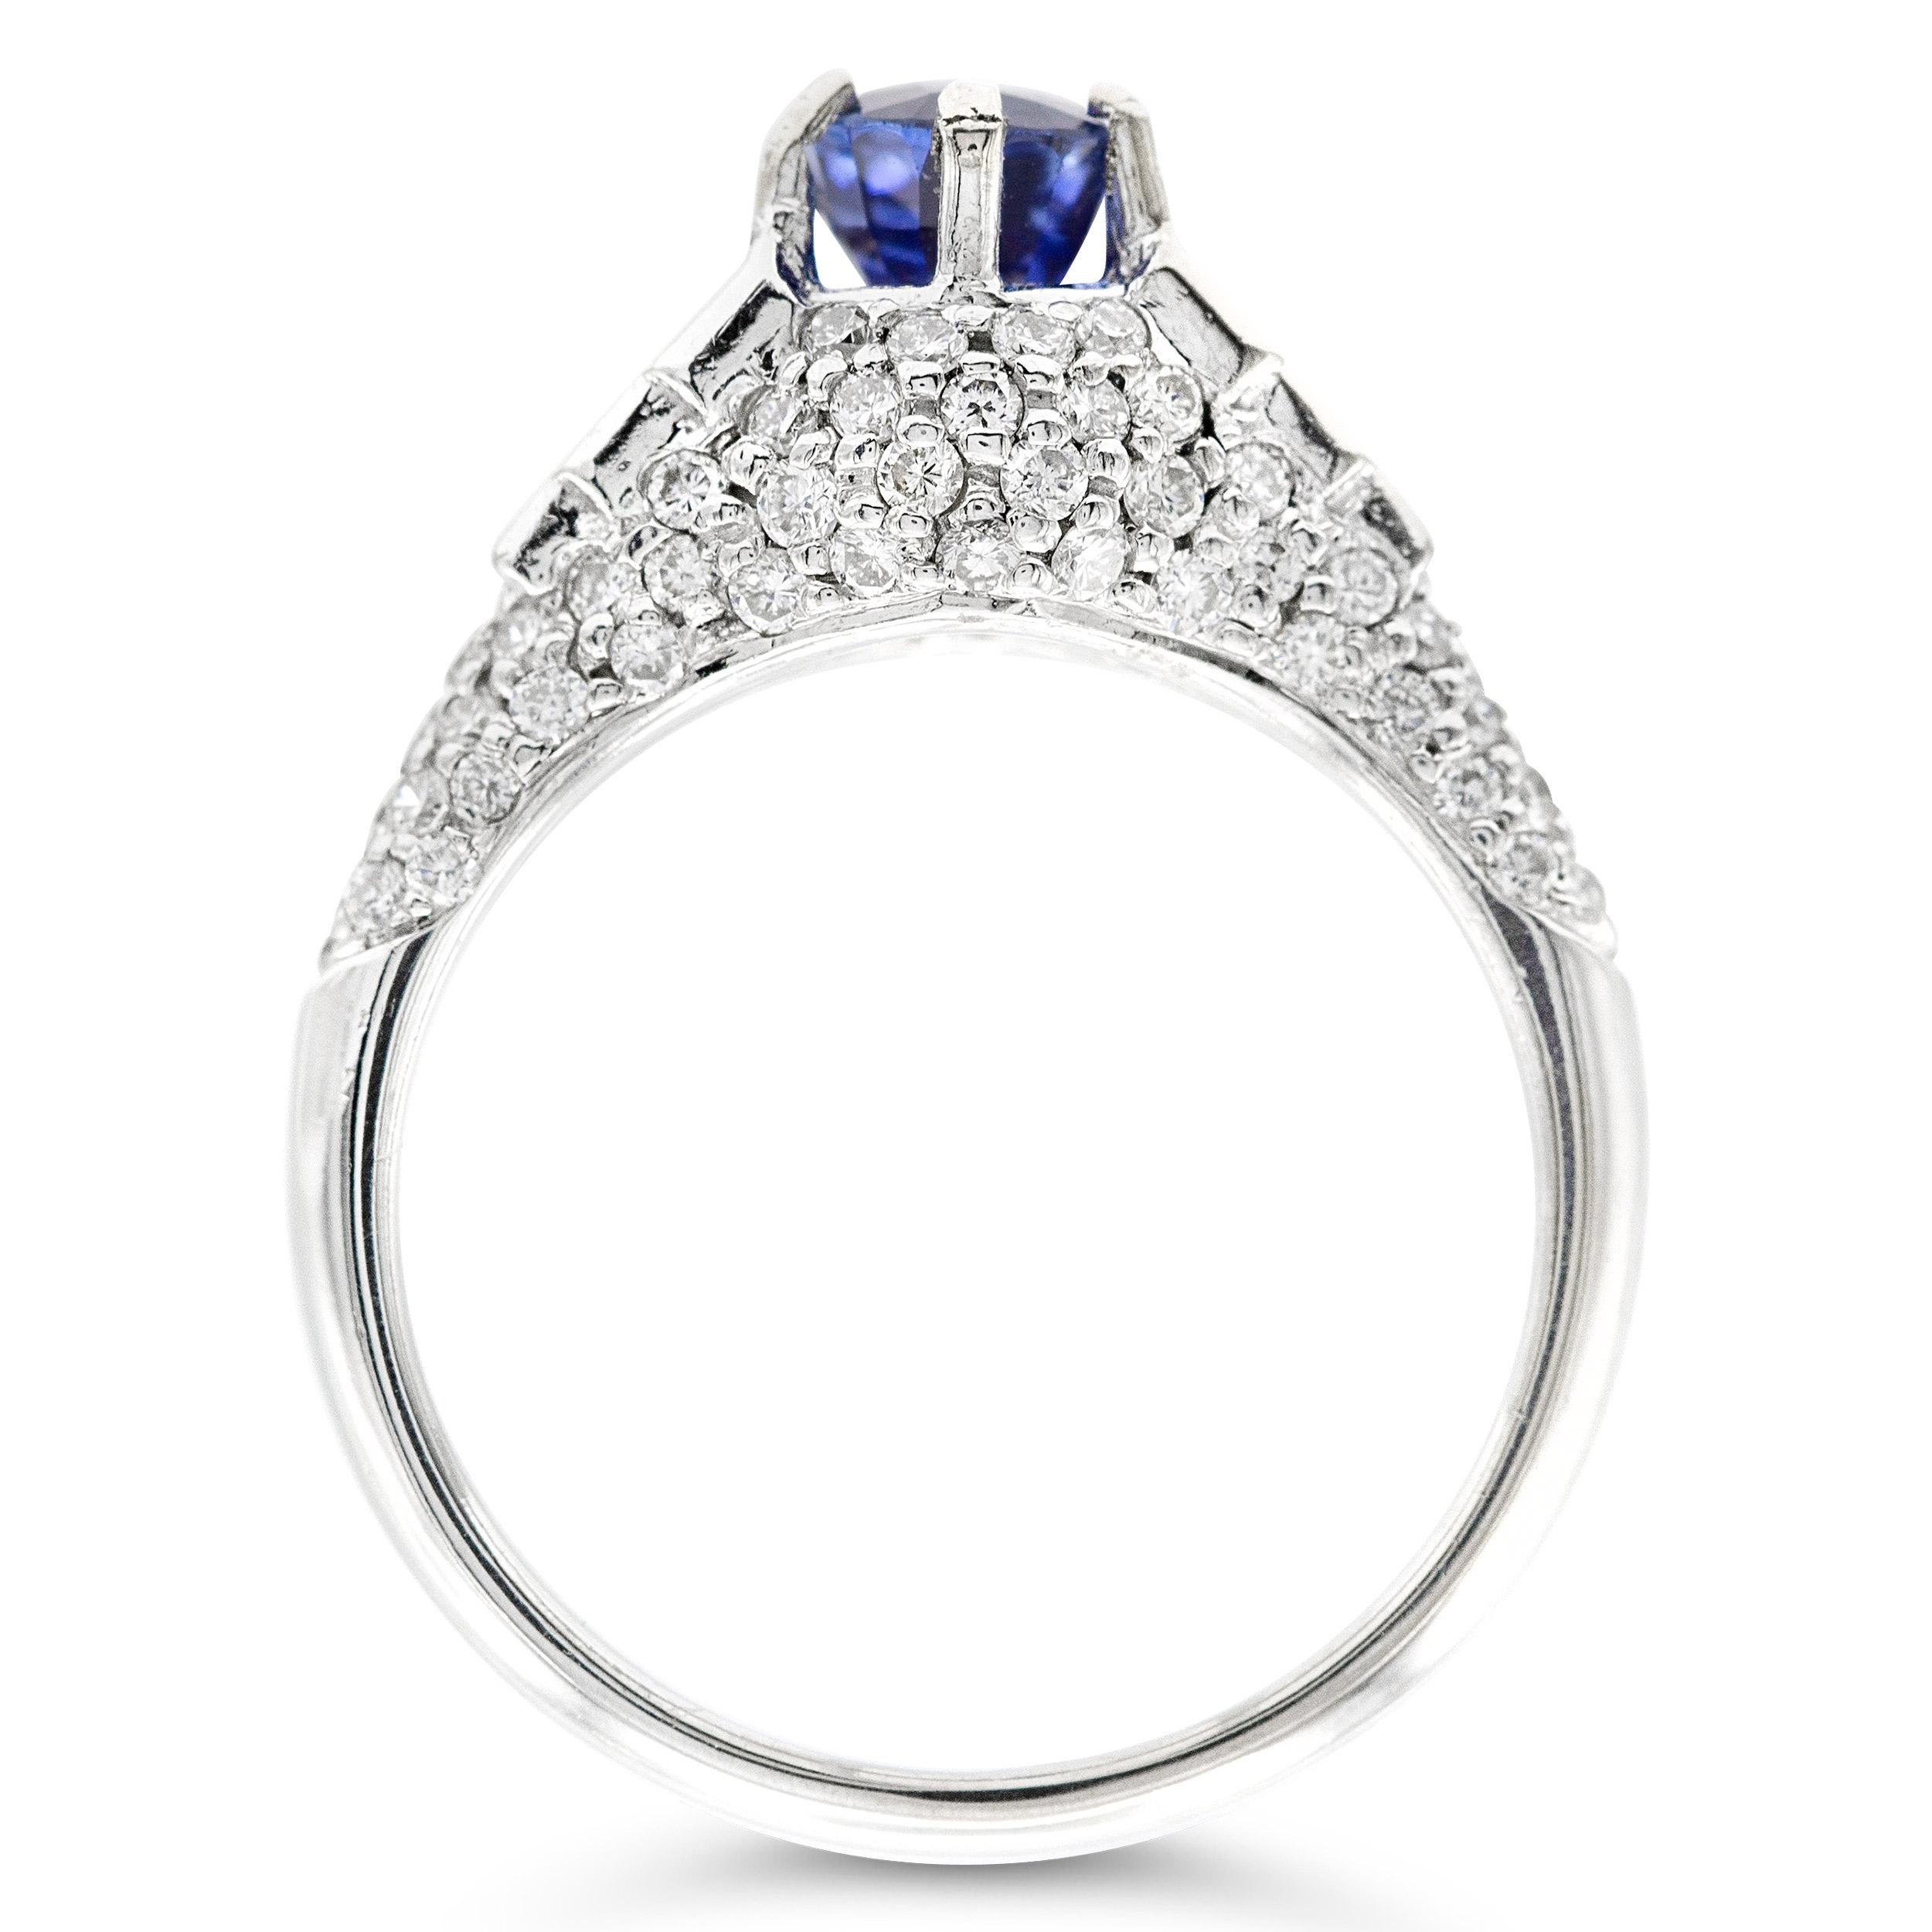 Vintage GIA Certified 1.24ct. Sapphire Dome Ring in Platinum & 14k White Gold In Good Condition For Sale In New York, NY